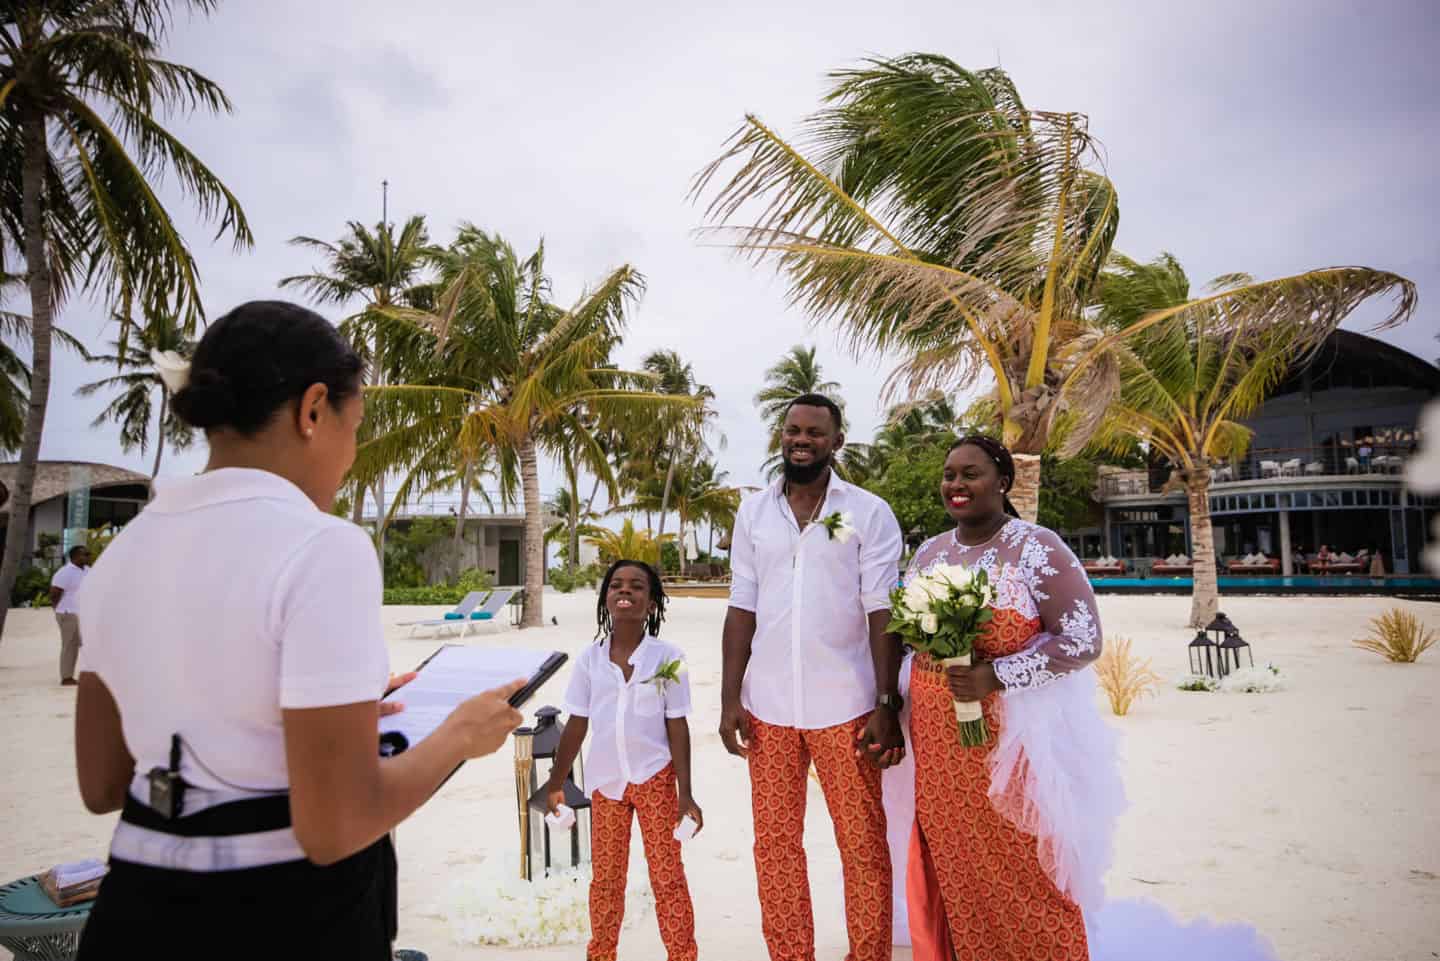 Renewal of vows experience in Maldives